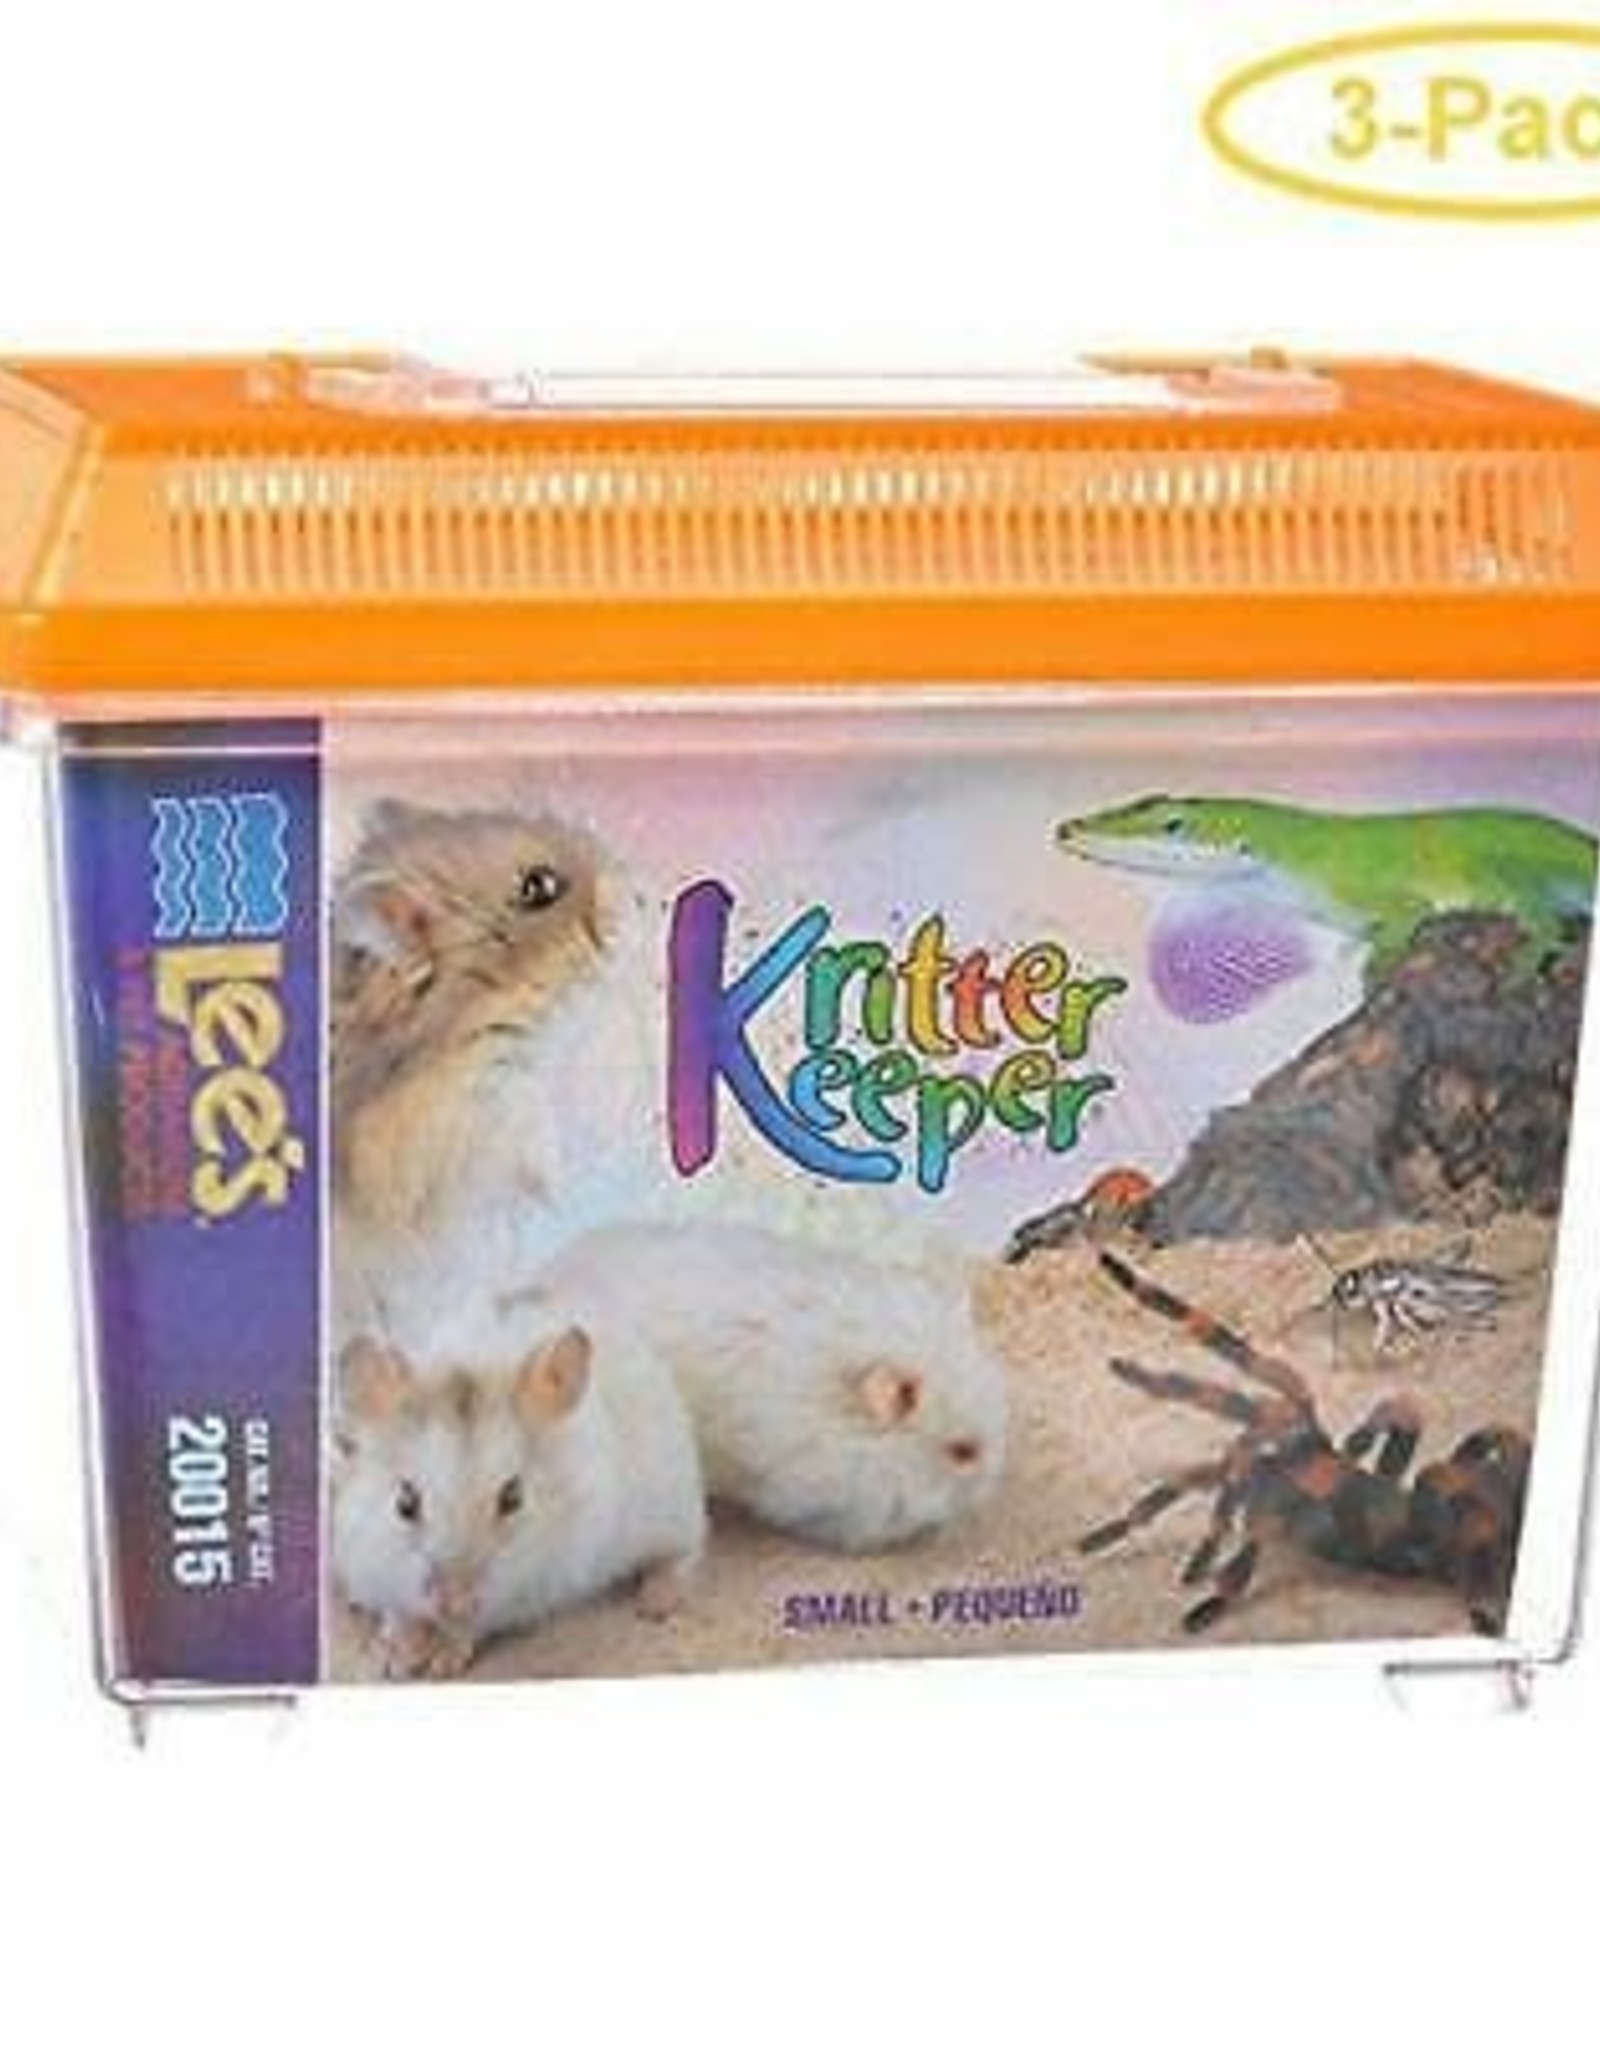 LEE'S PET PRODUCTS LEE'S- KRITTER KEEPER- RECTANGLE- 6.5X5.25X3-  SMALL